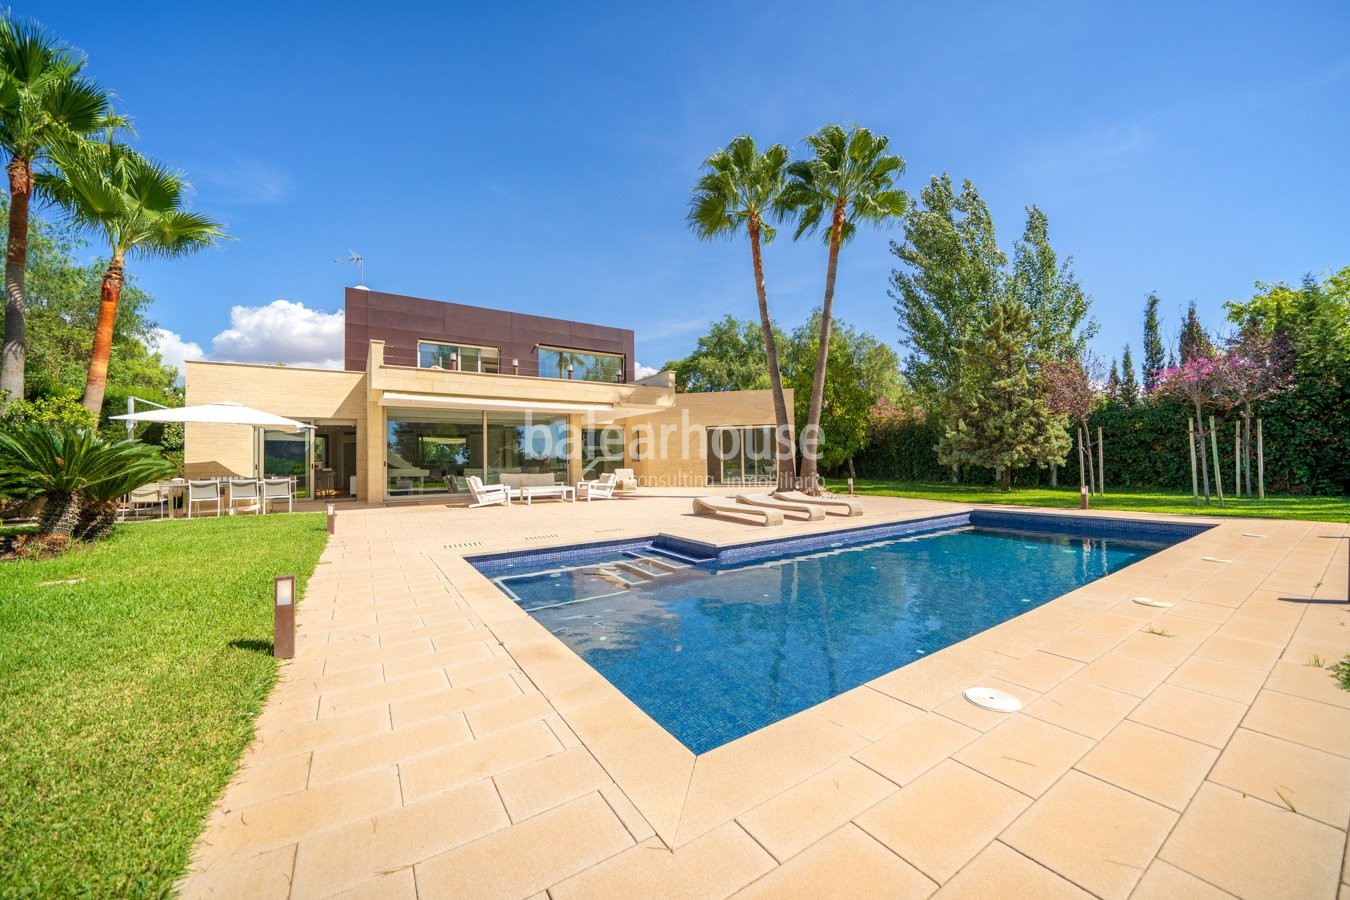 Modern villa with ample light-filled spaces, large garden and swimming pool very close to Palma.